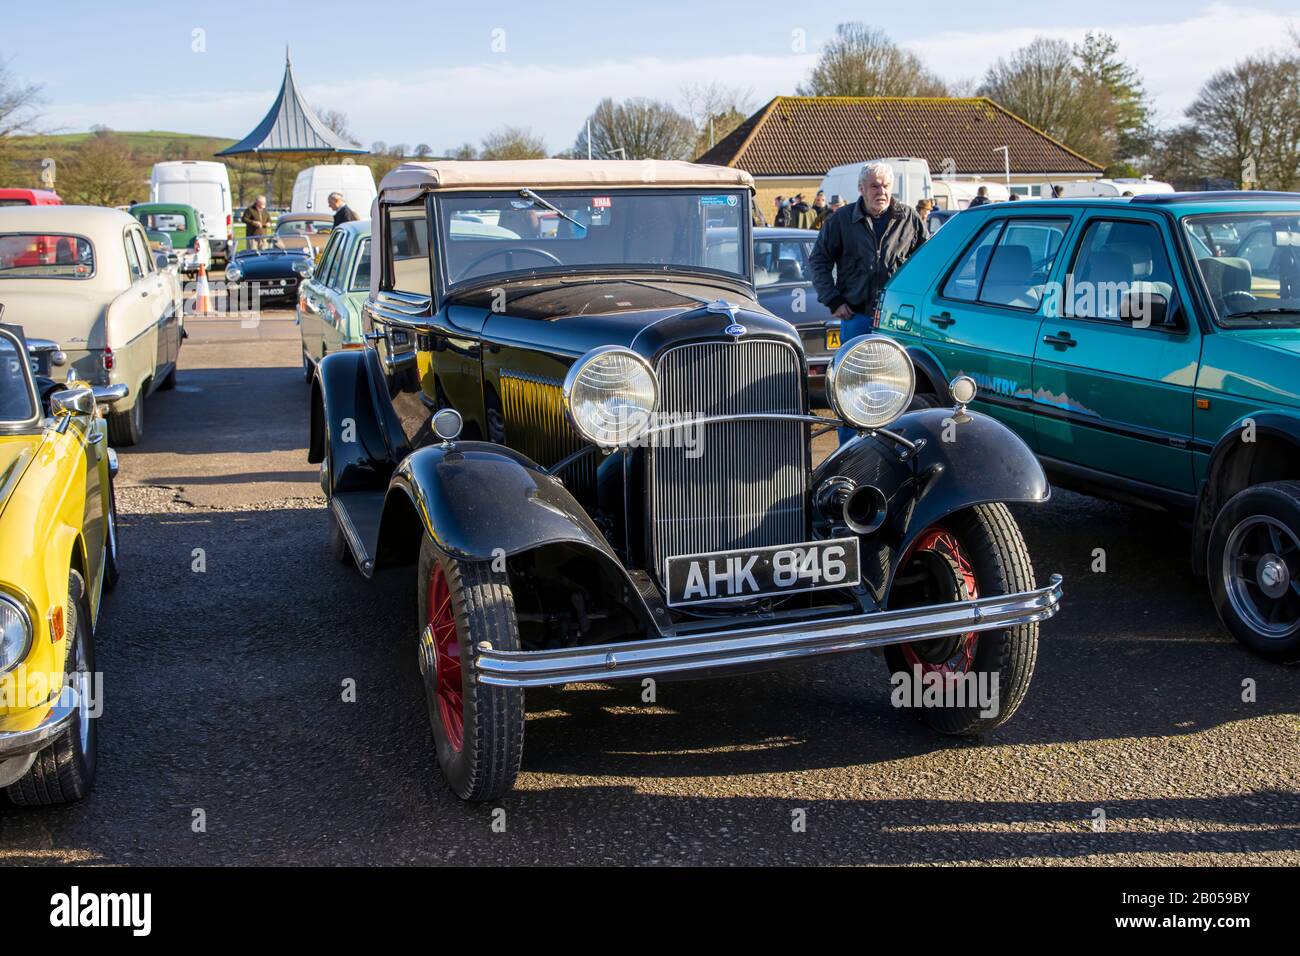 Ford Model B, 1932, Reg No: AHK 846, at The Great Western Classic Car Show, Shepton Mallet UK, Febuary 08, 2020 Stock Photo